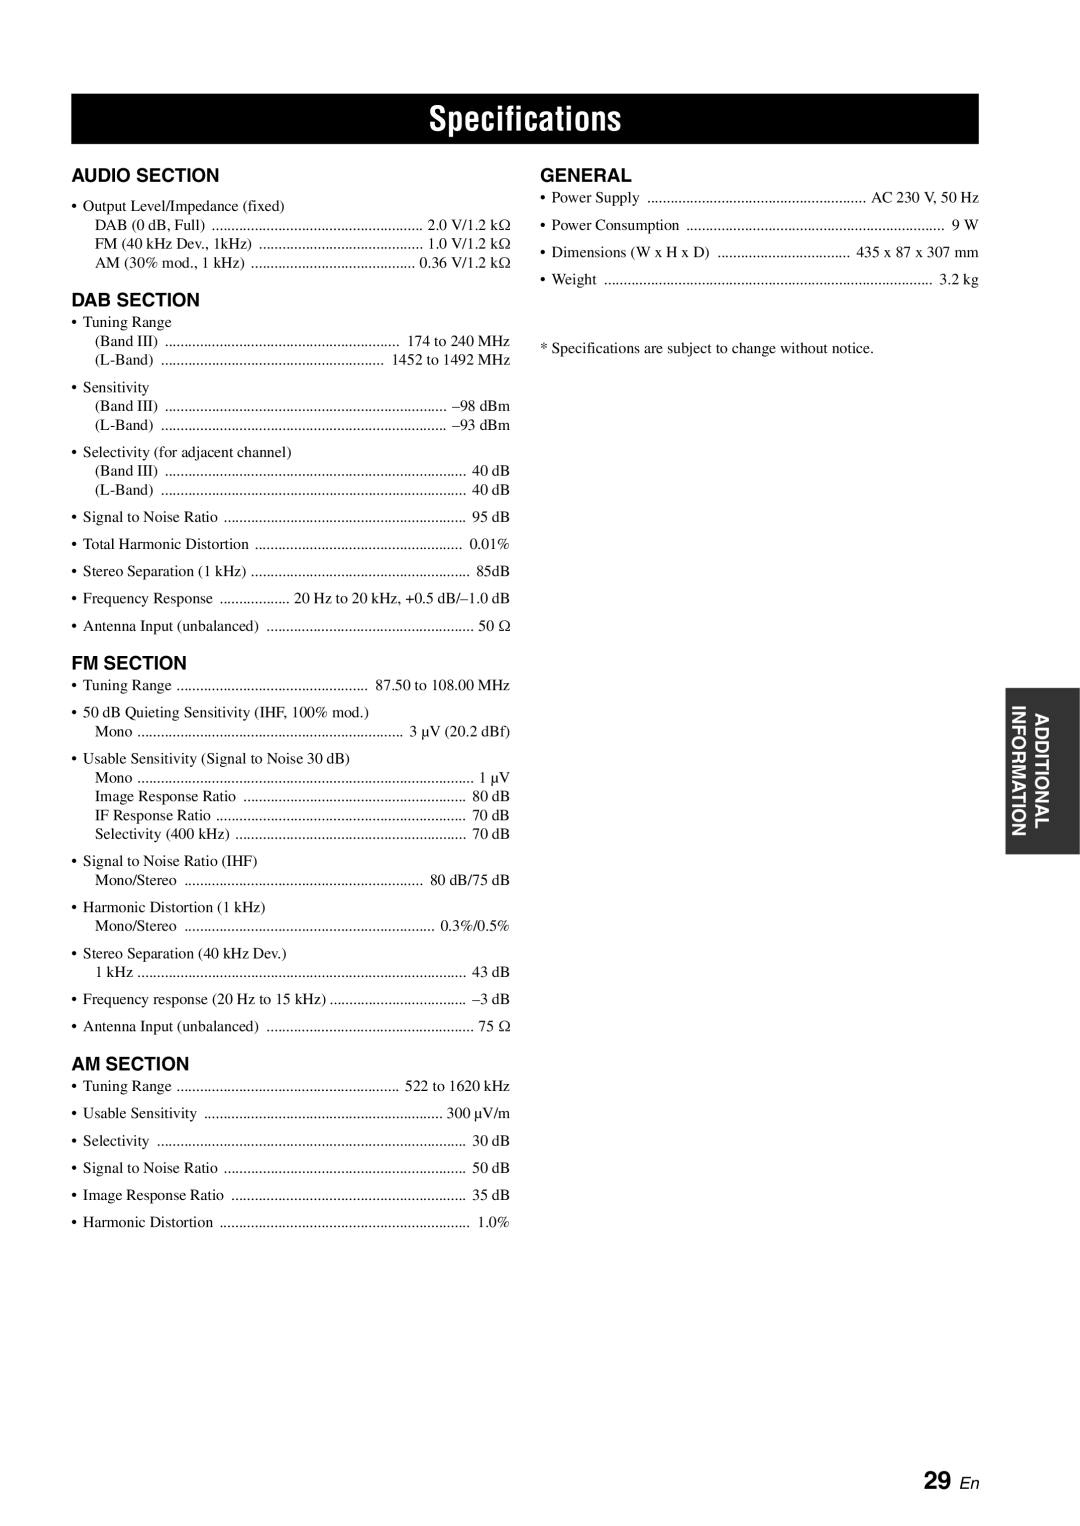 Yamaha TX-761DAB owner manual Specifications, 29 En, Information, Additional 